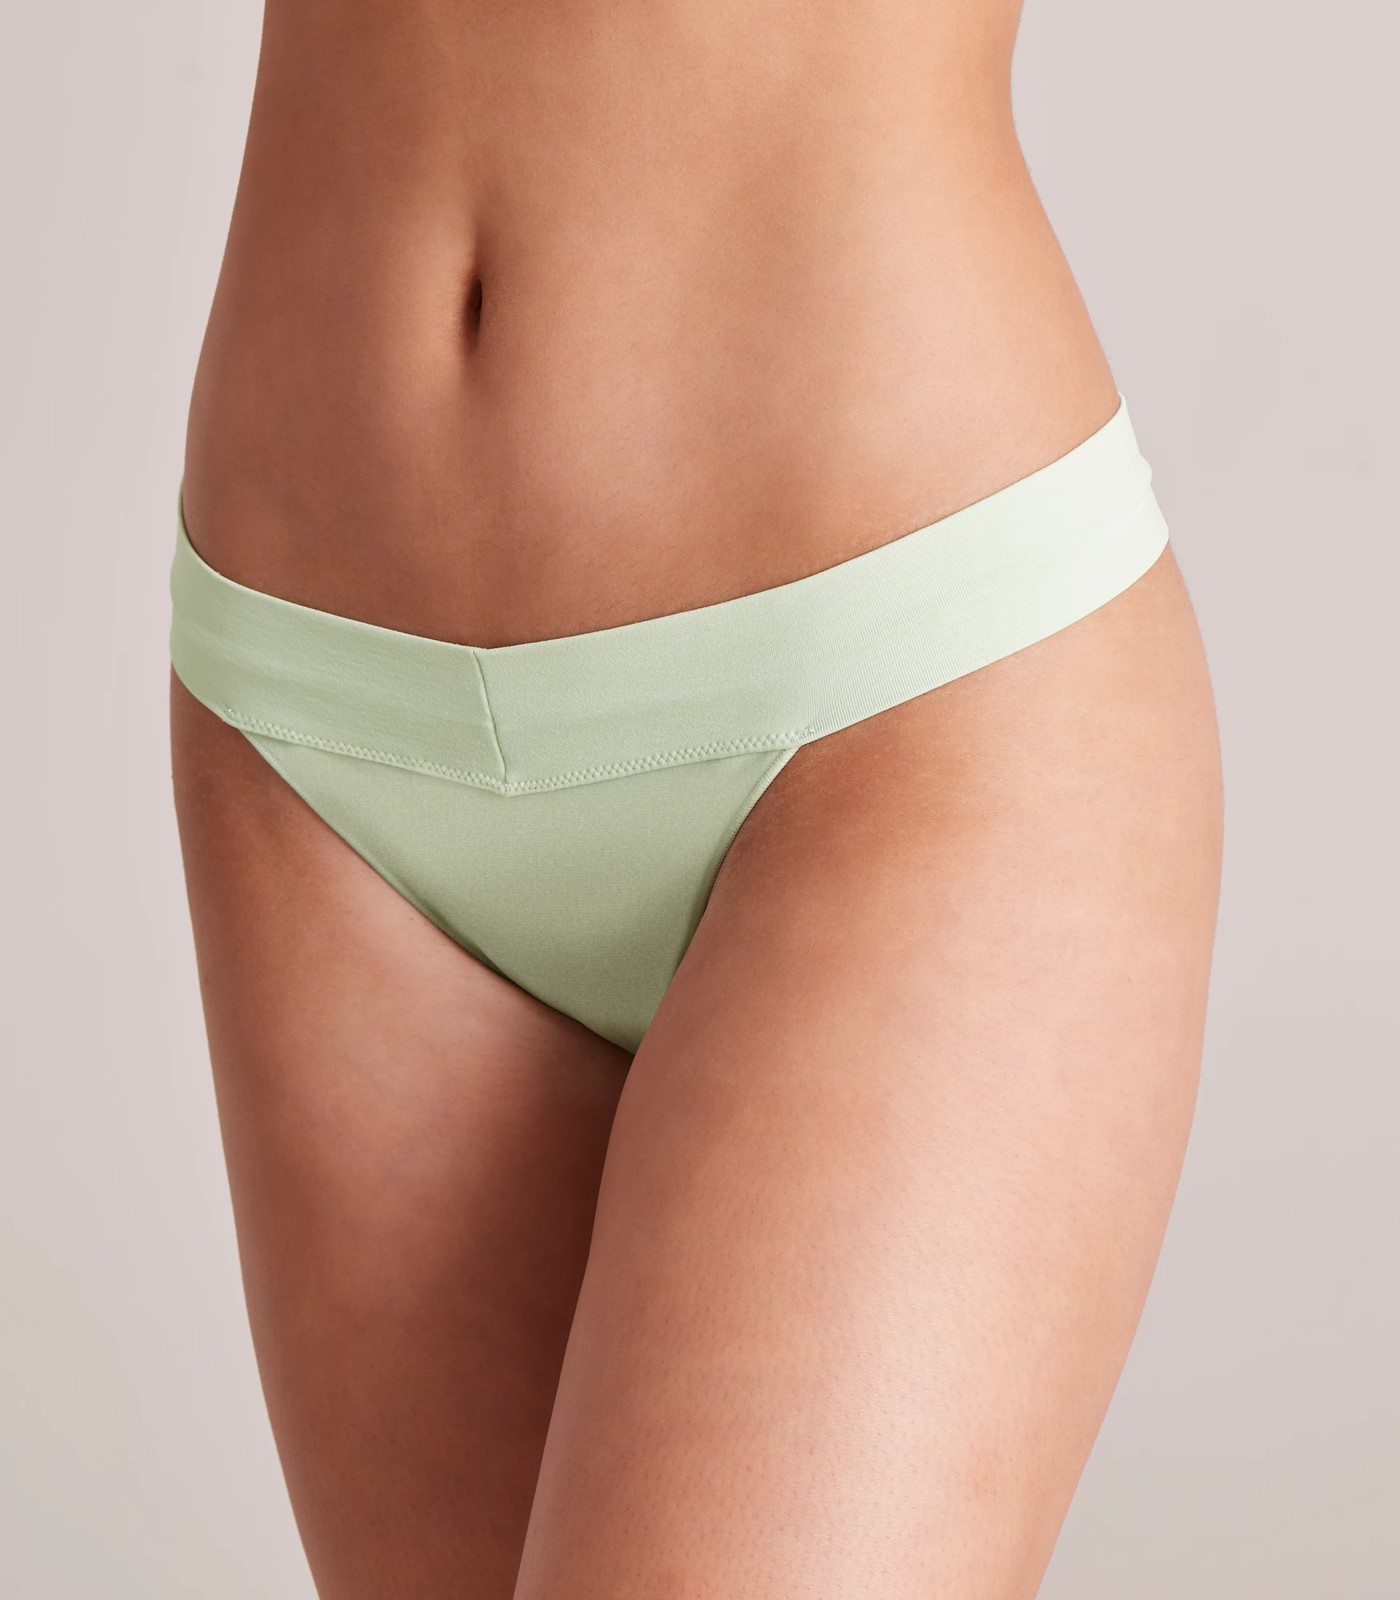 Lily Loves Seamfree G-String Briefs; Style: LGS52376